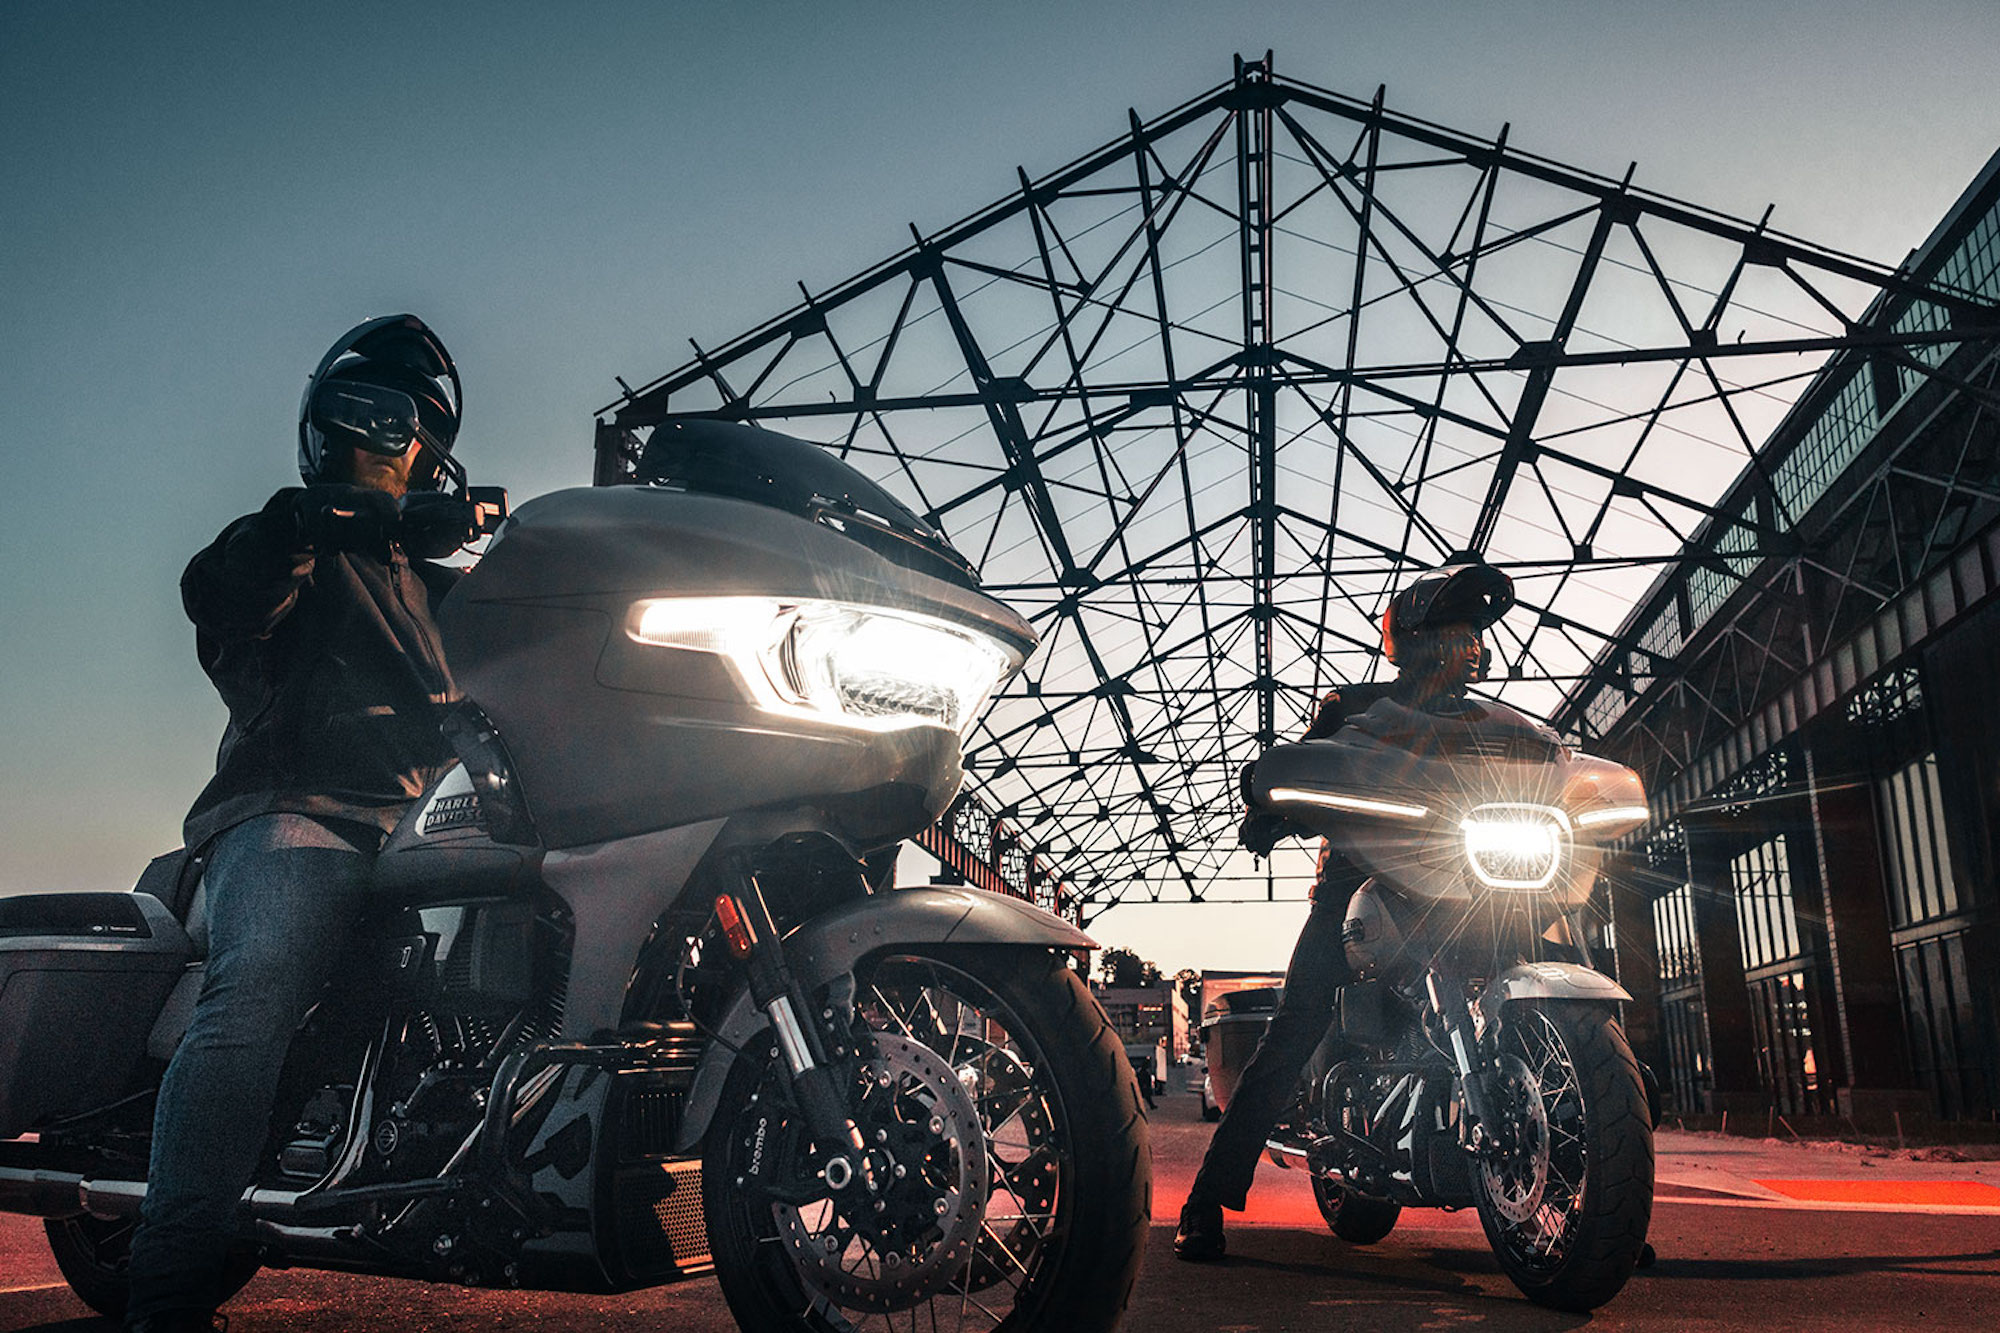 A view of Harley-Davidson's Road Glide and Street Glide. Media sourced from Harley-Davidson.